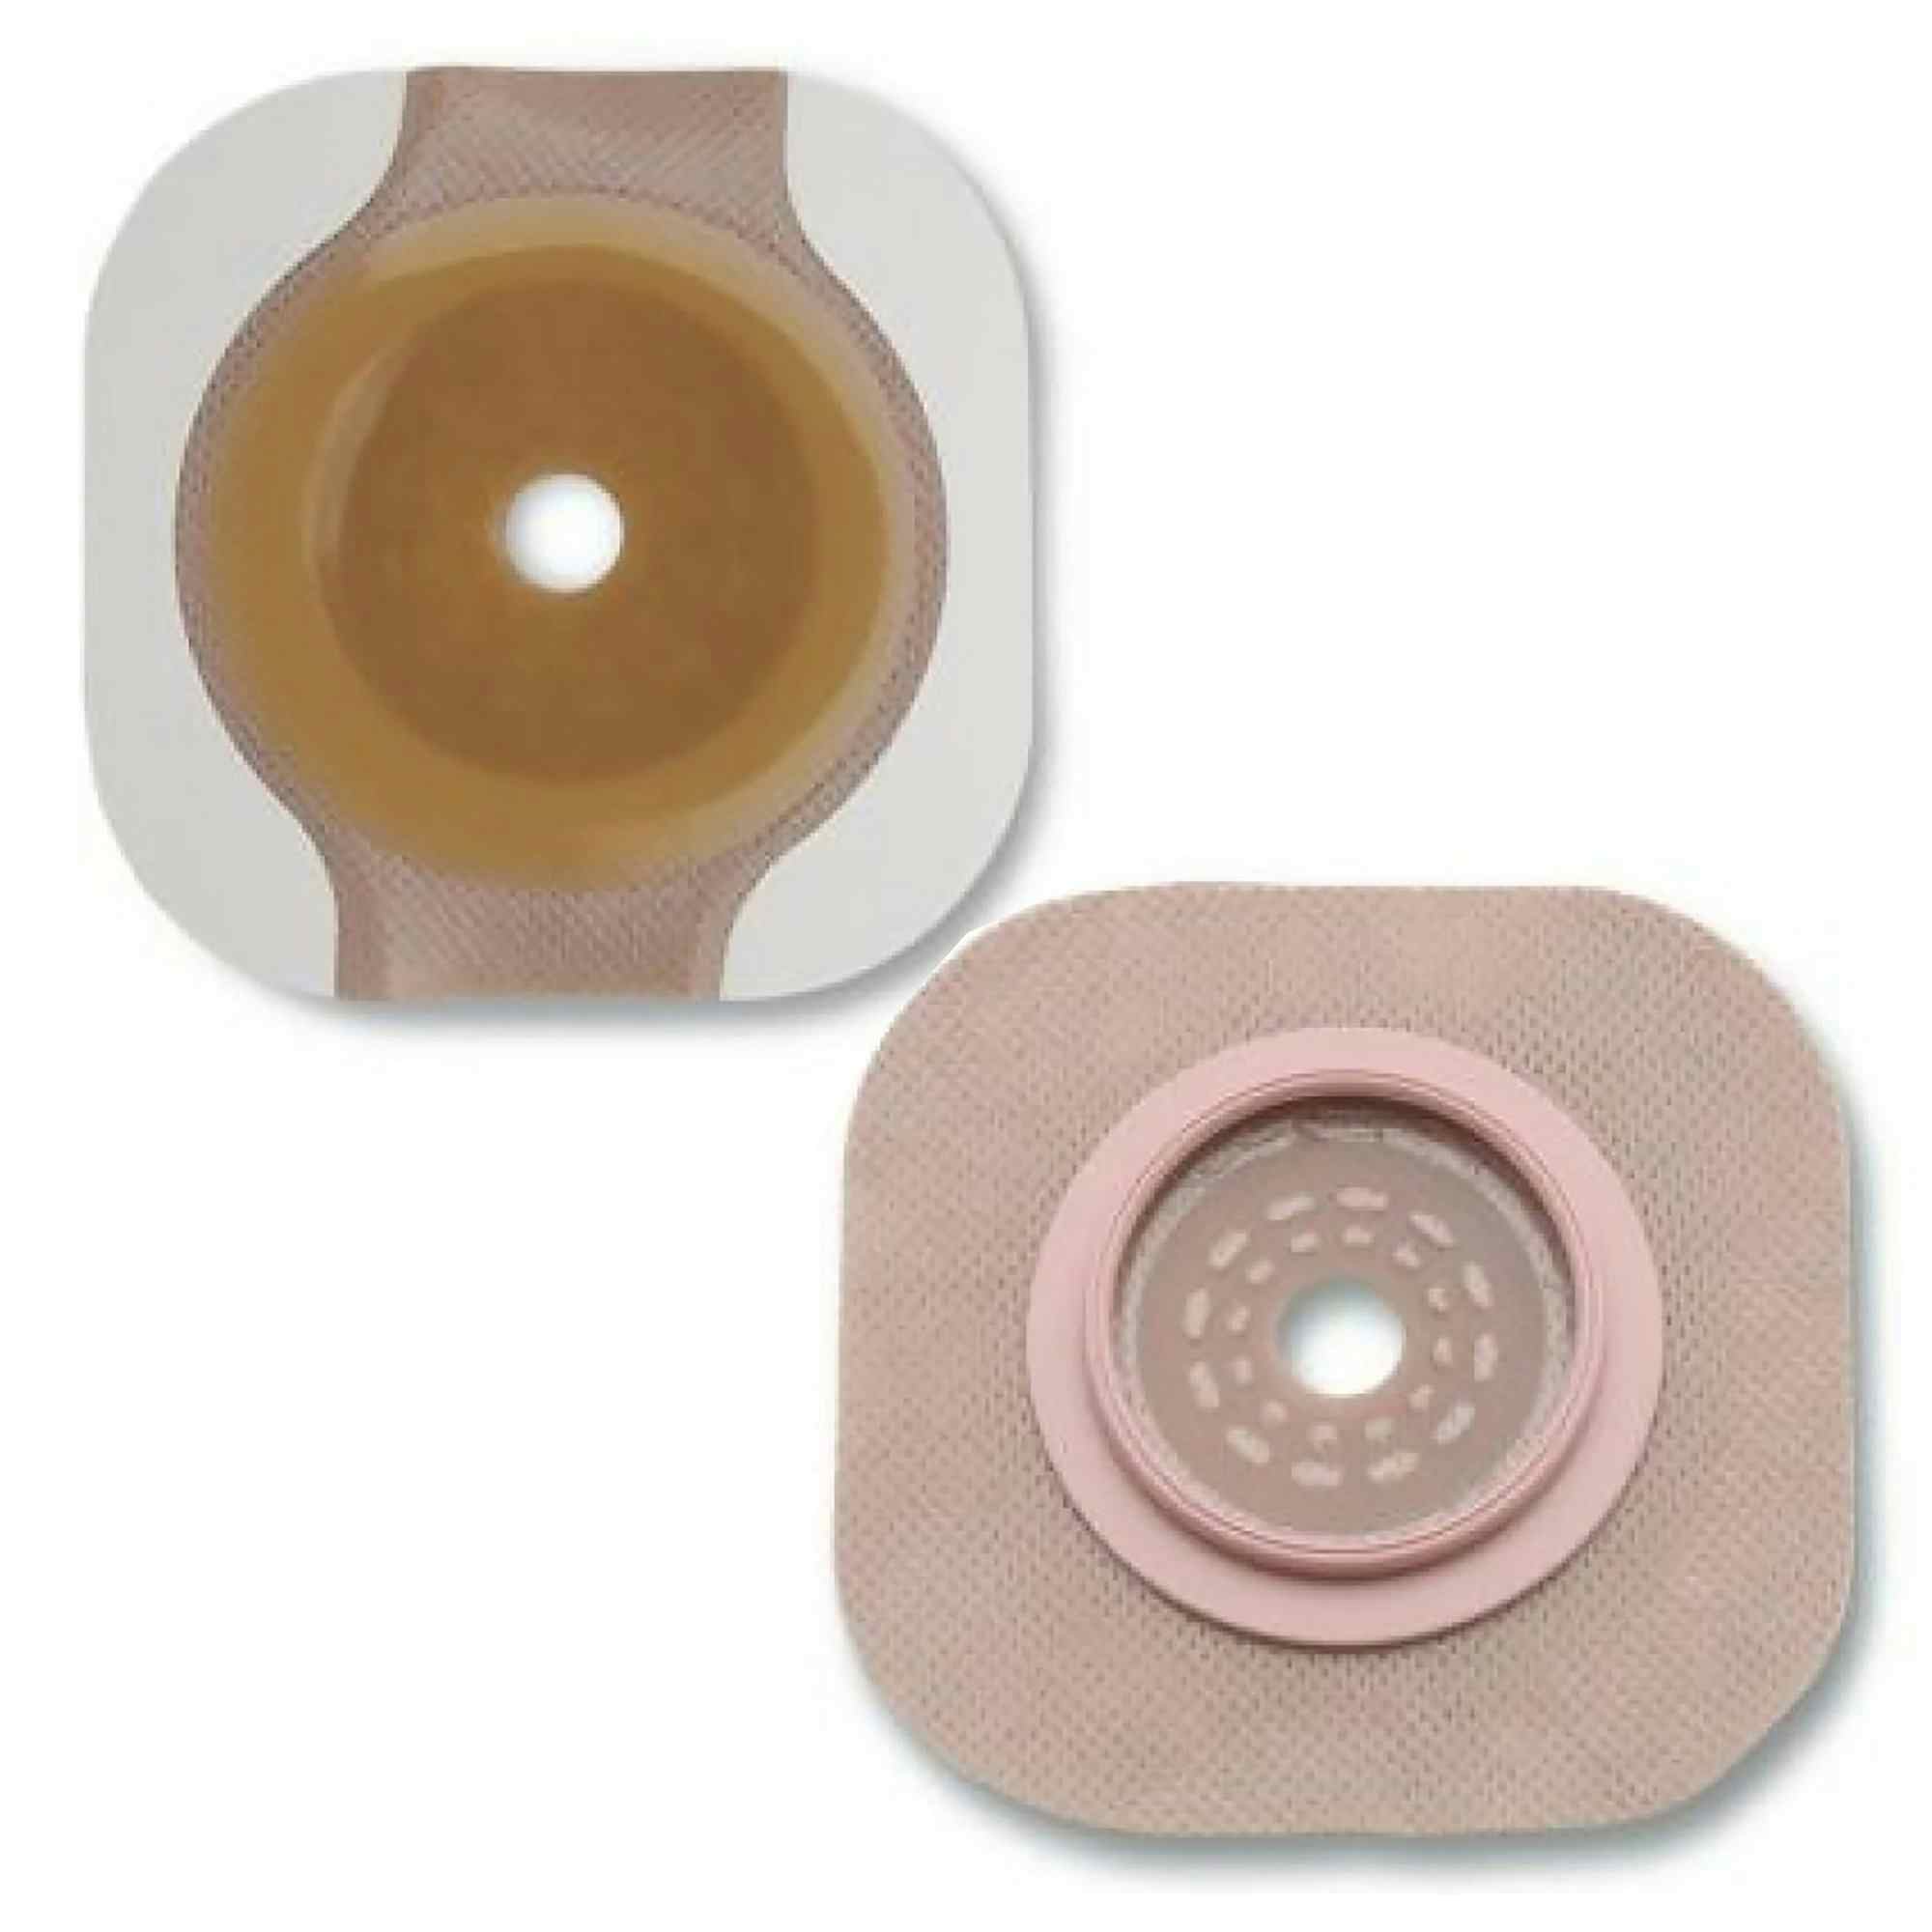 New Image Flextend Ostomy Barrier, Trim to Fit, 44 mm Flange, 14602, Box of 5